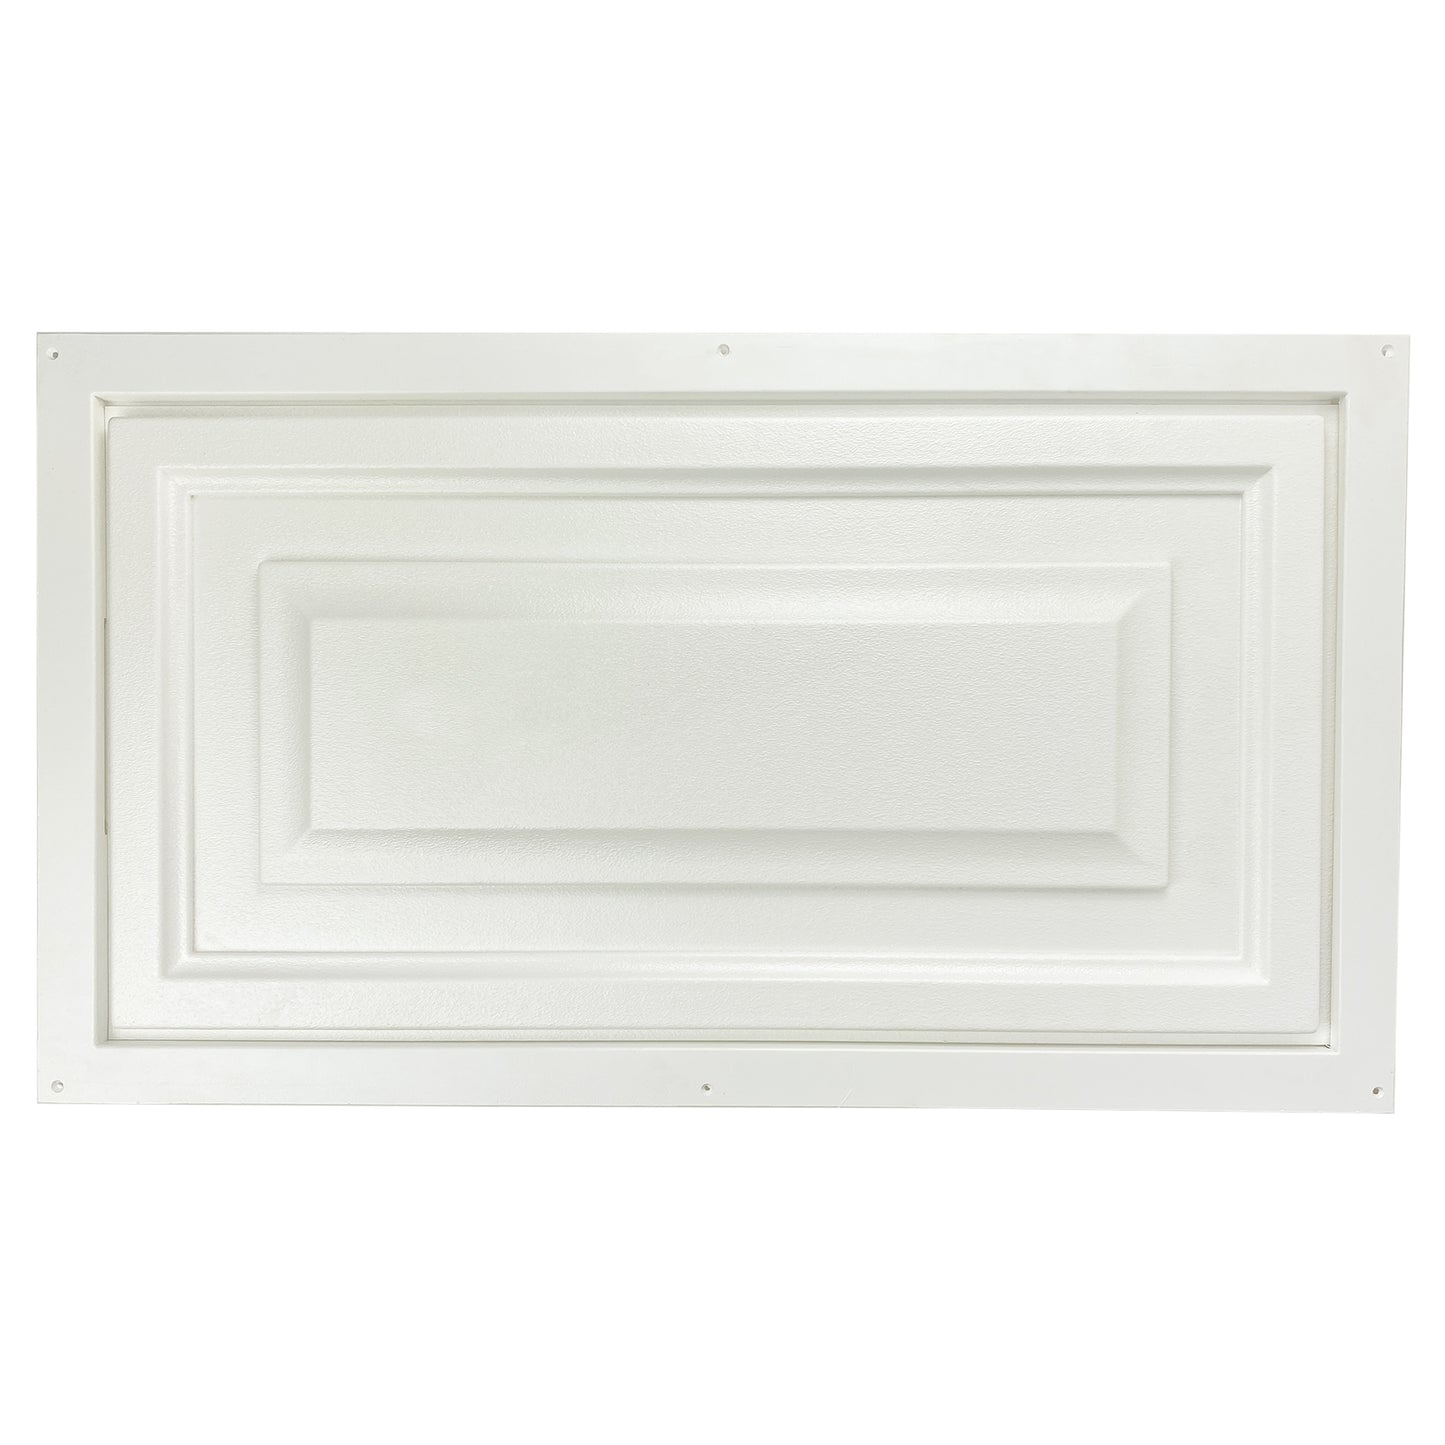 White Contemporary Access Panel for wall installation